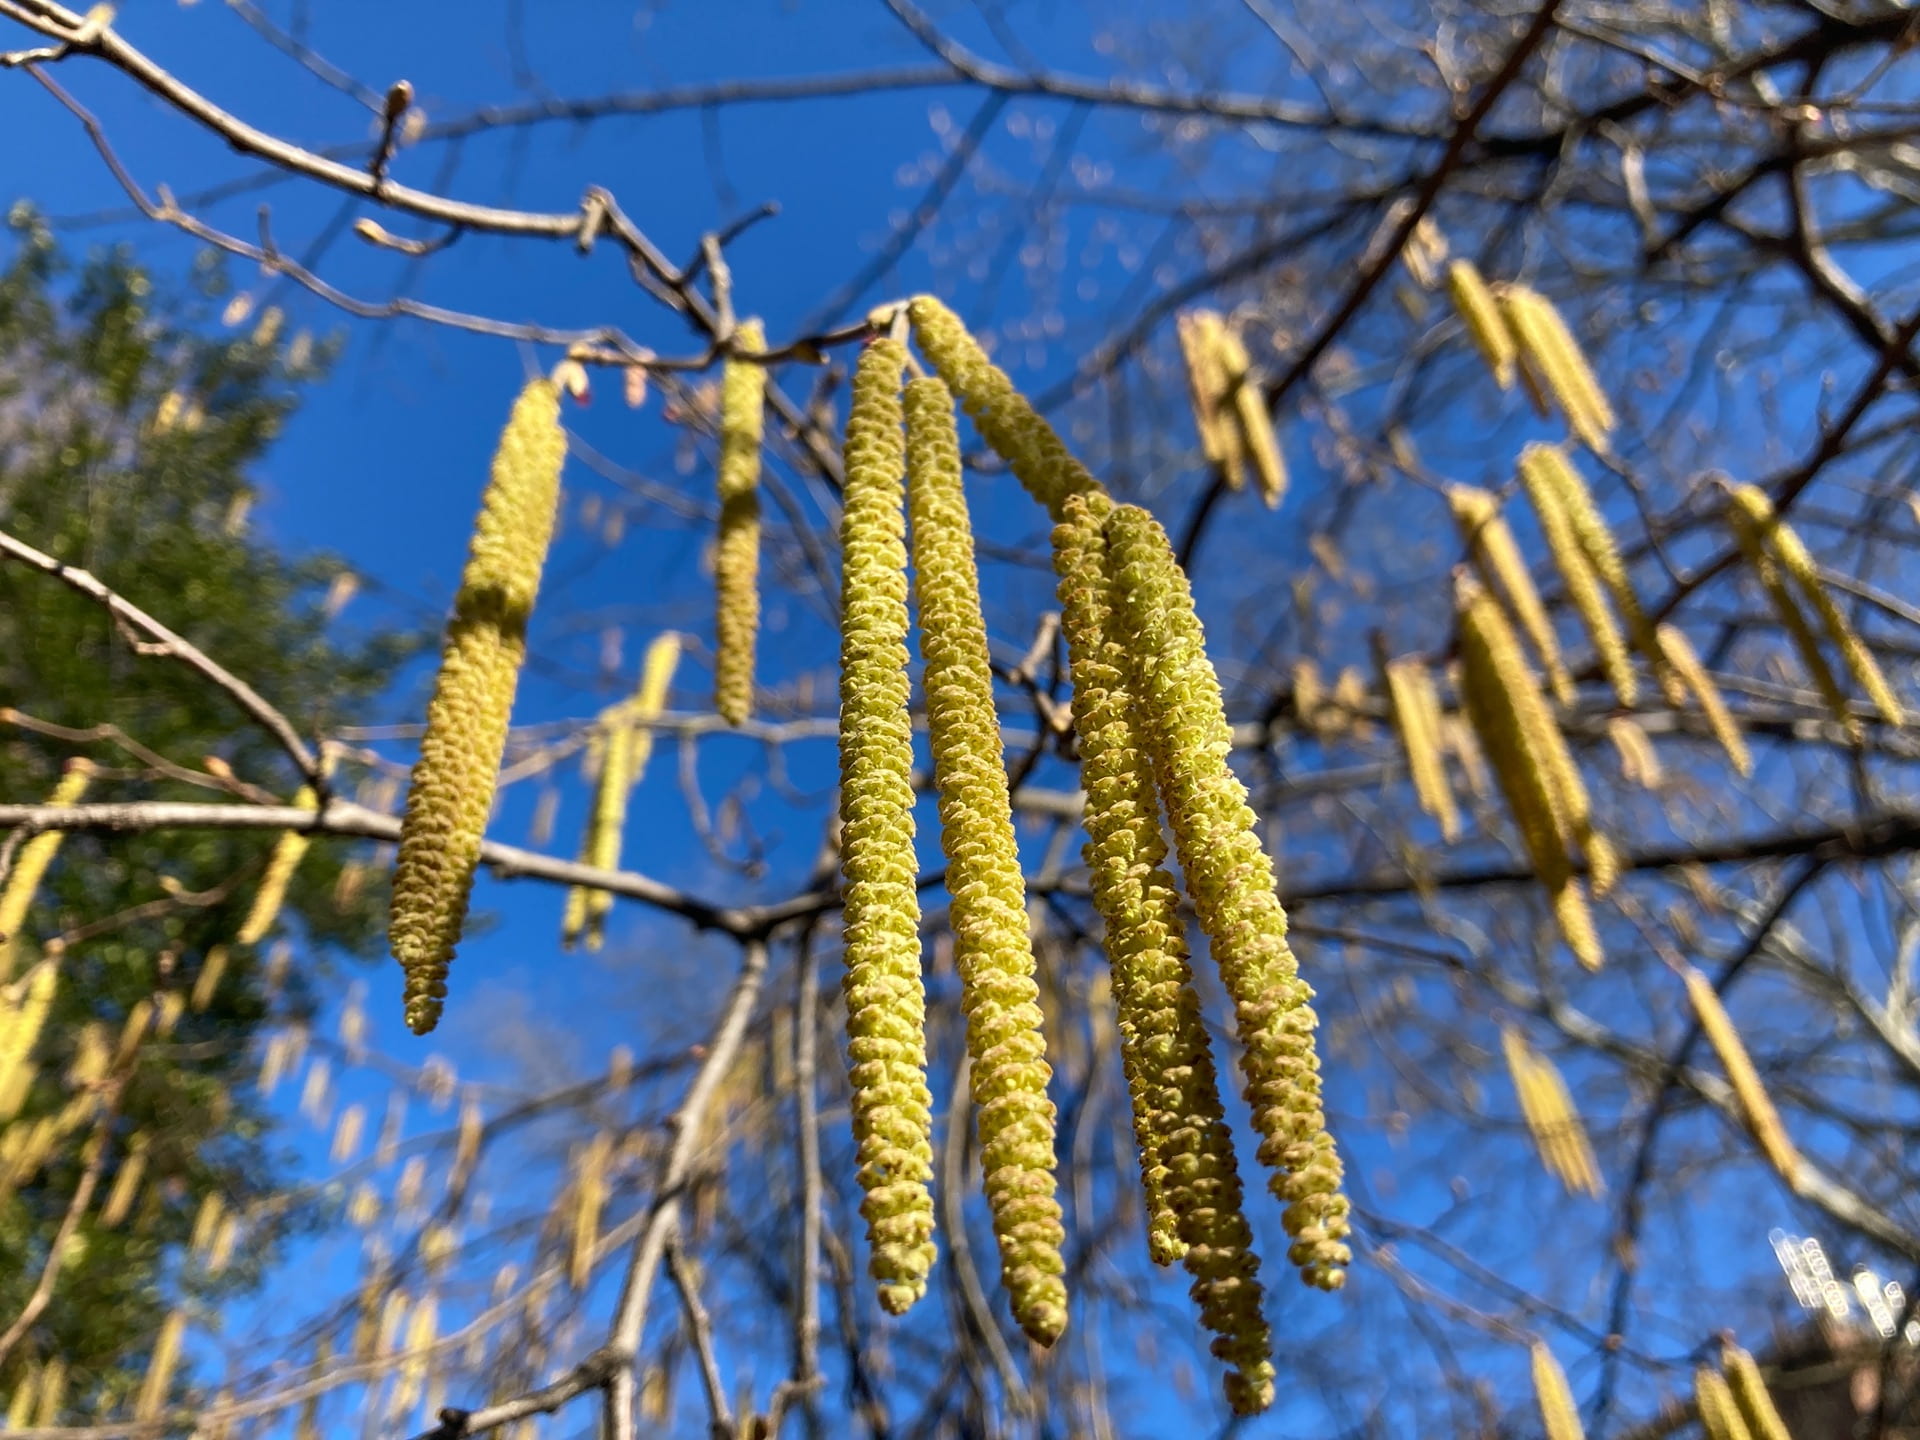 Corylus avellena sways gracefully in the wind.